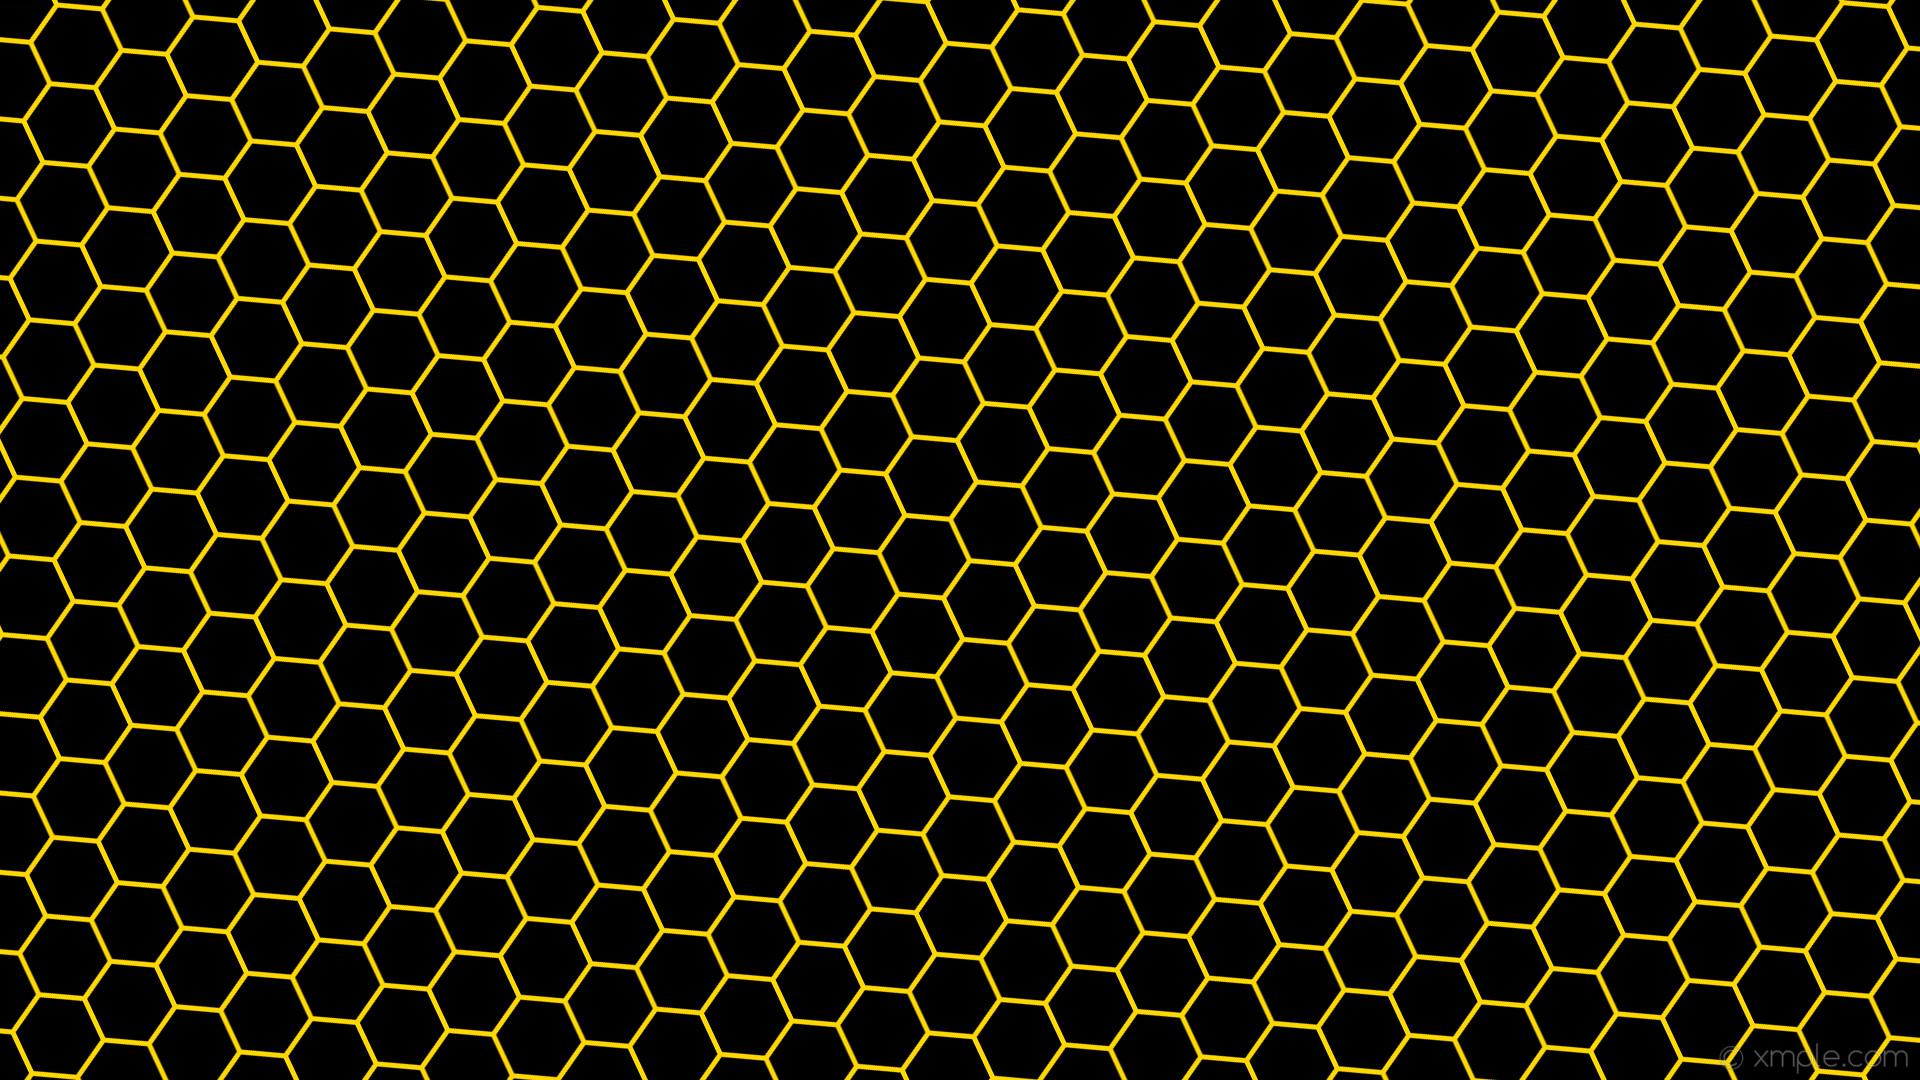 Honeycomb Wallpaper background picture